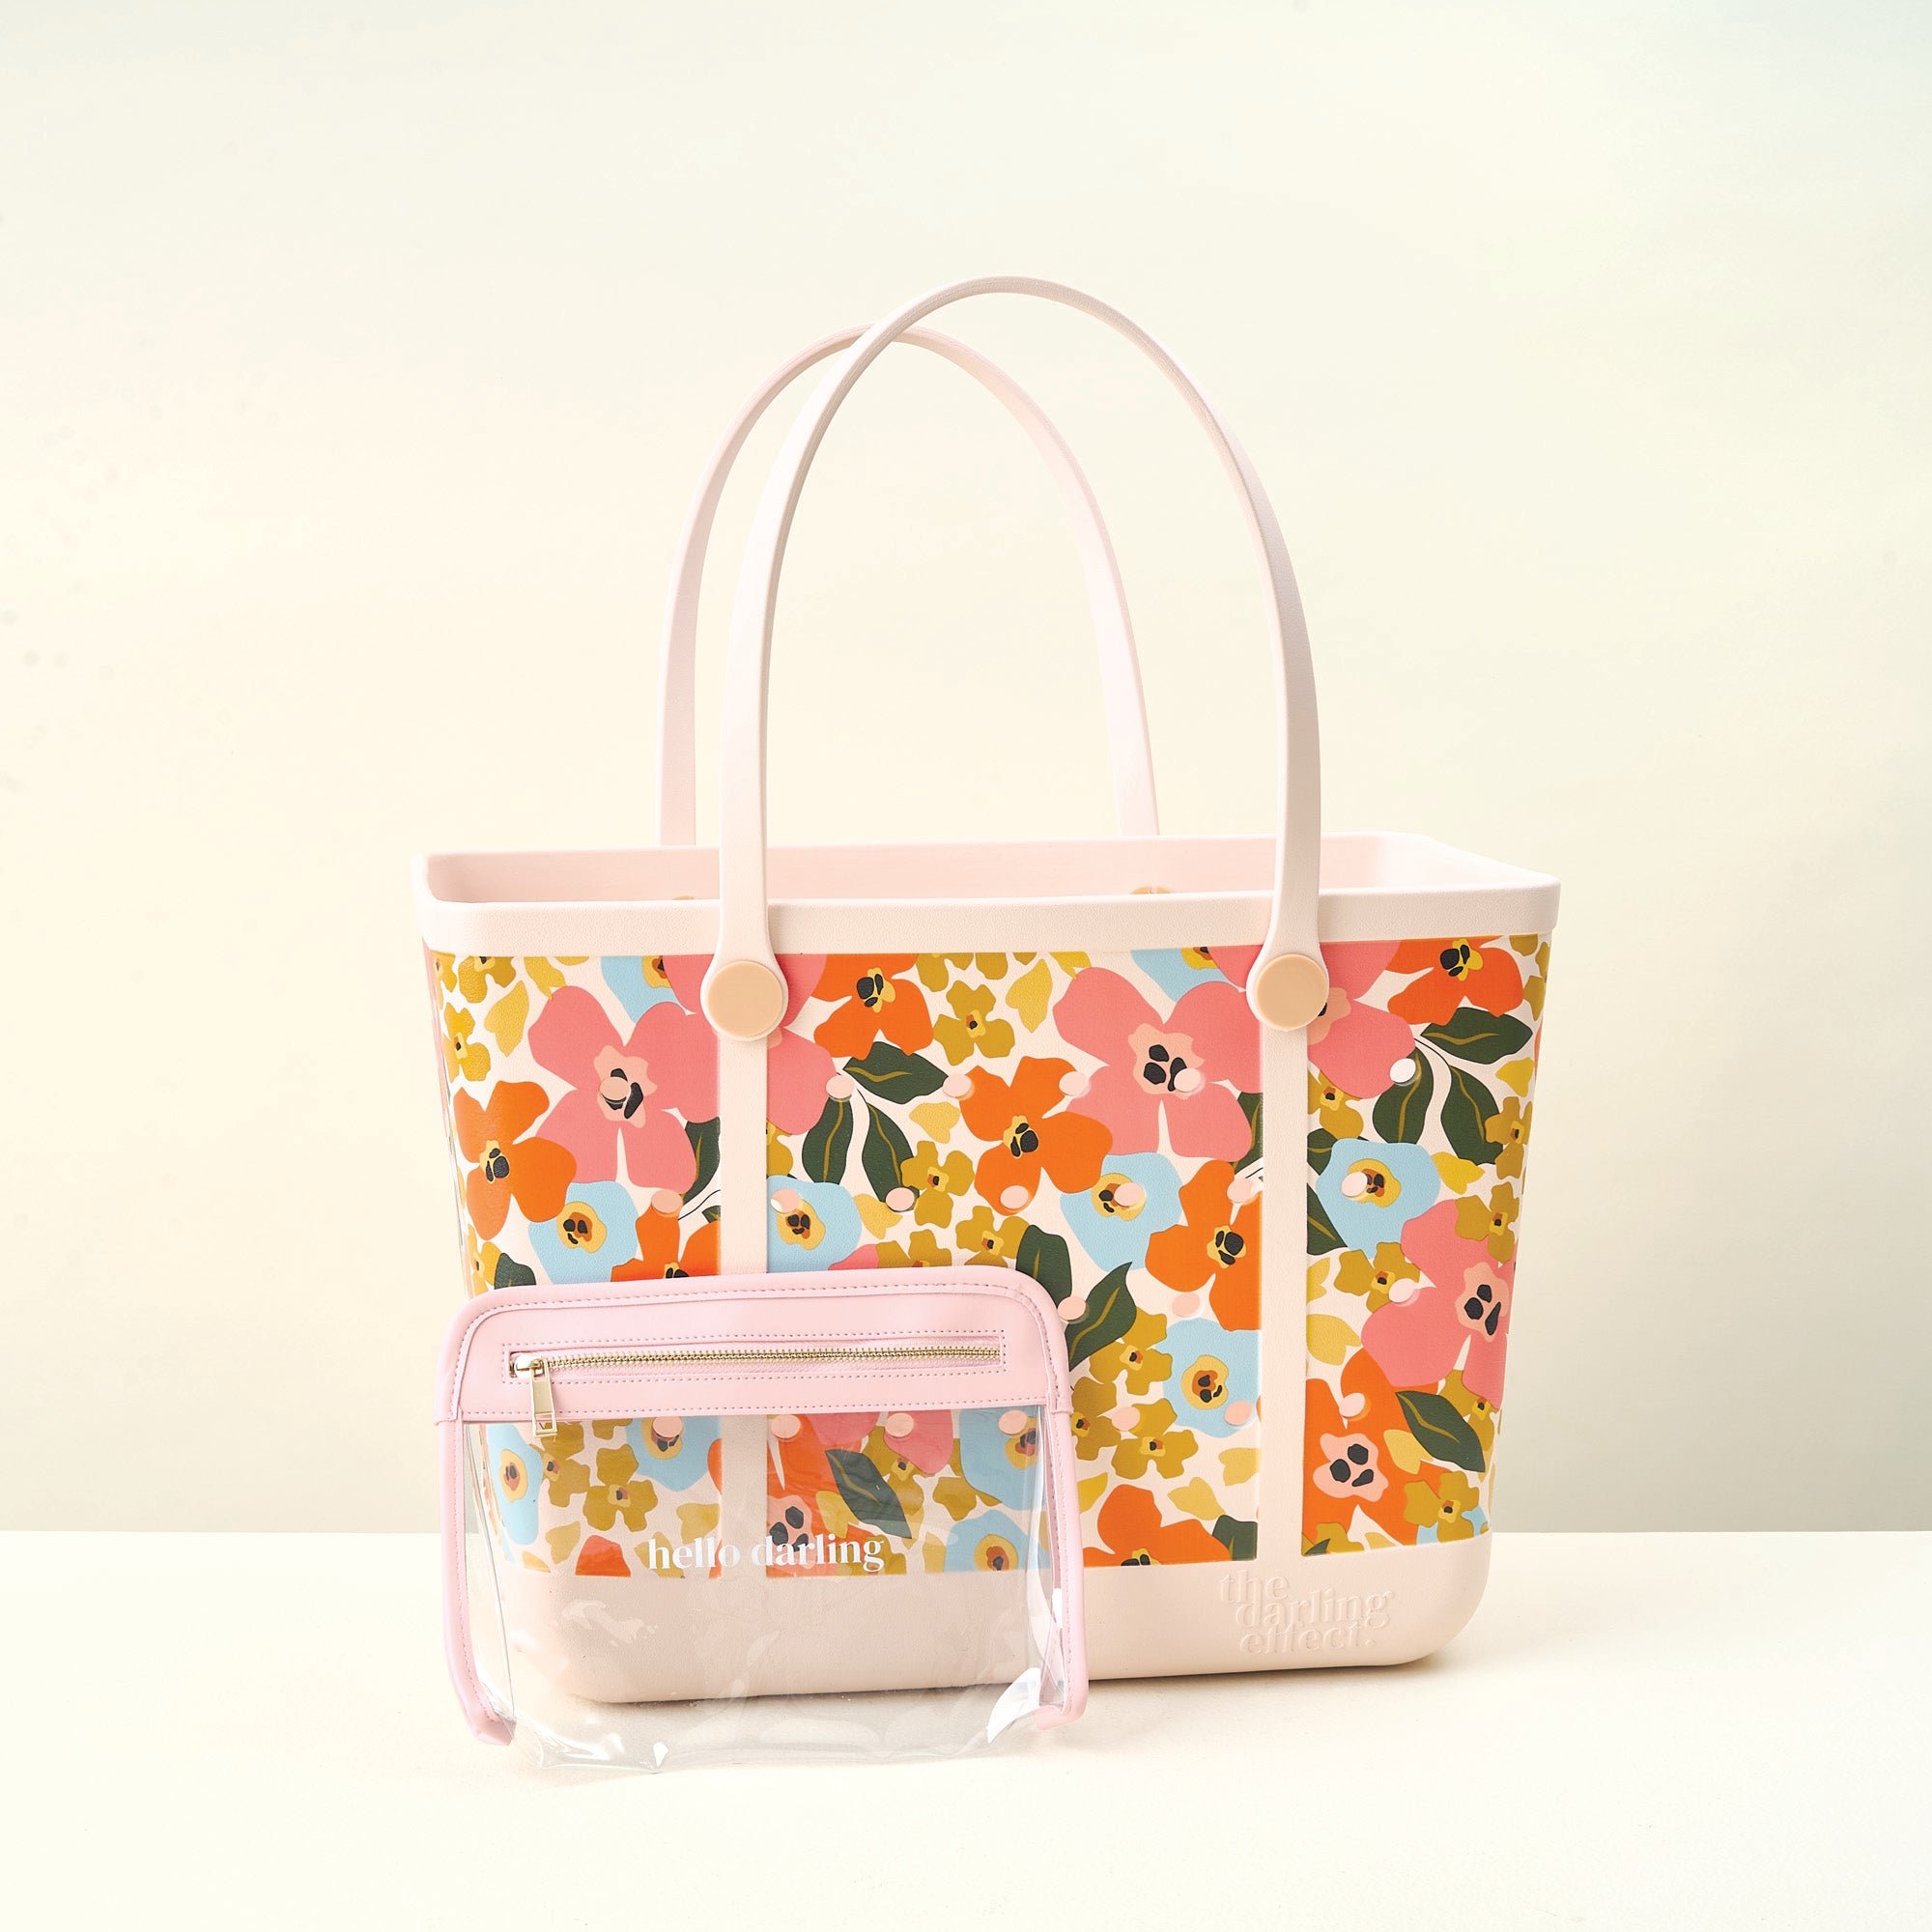 Carry-It-All Tote Bag- Lil' Floral Delight